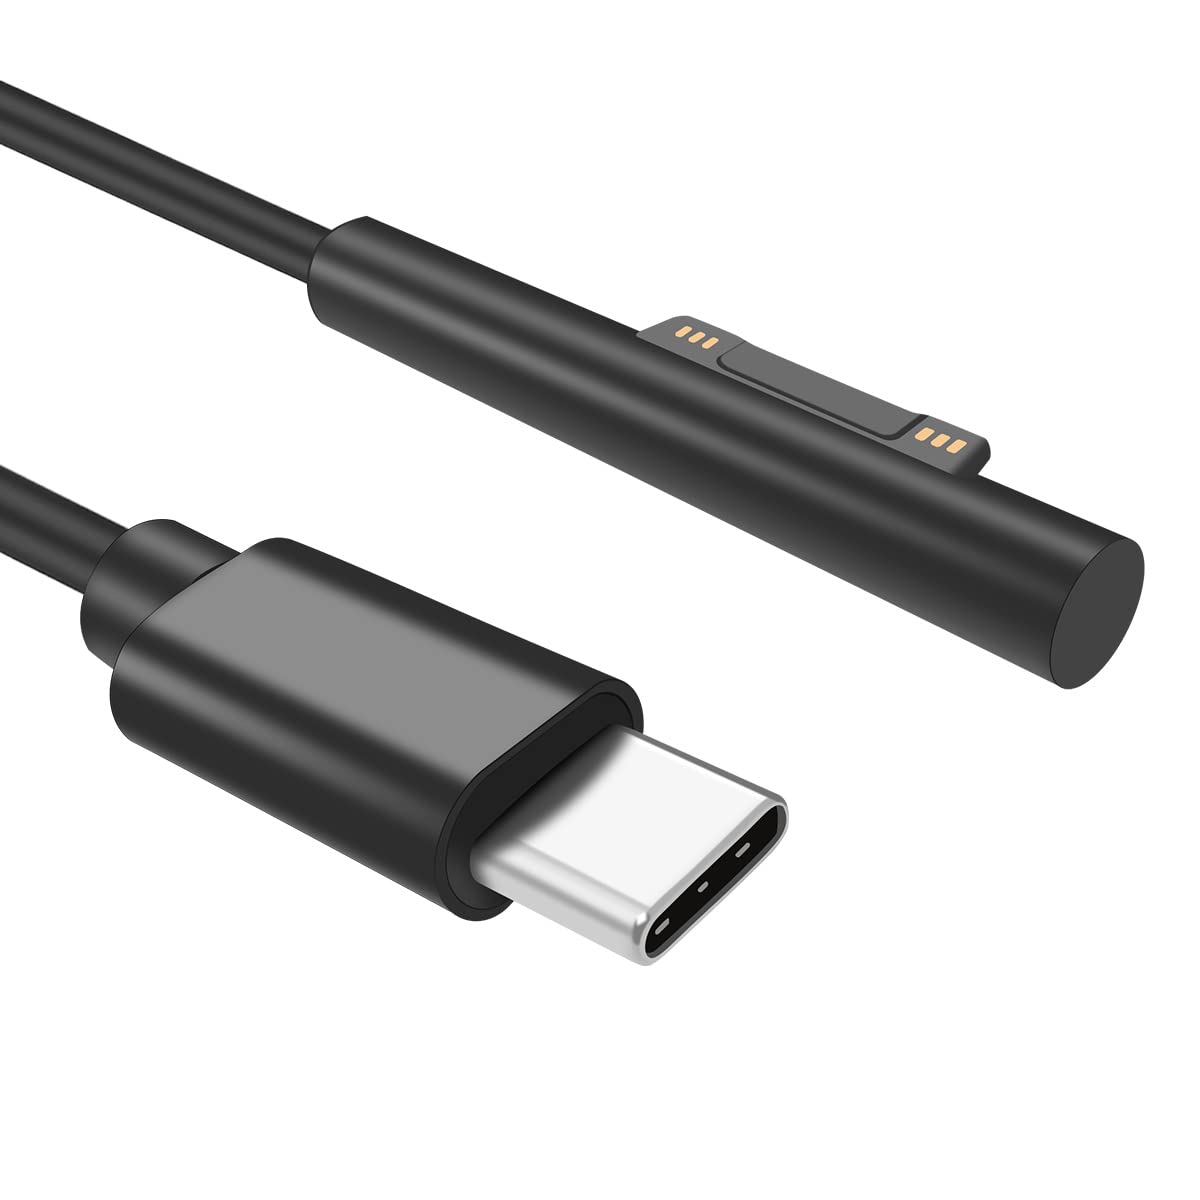 Surface Pro 7 charging cable and accessories